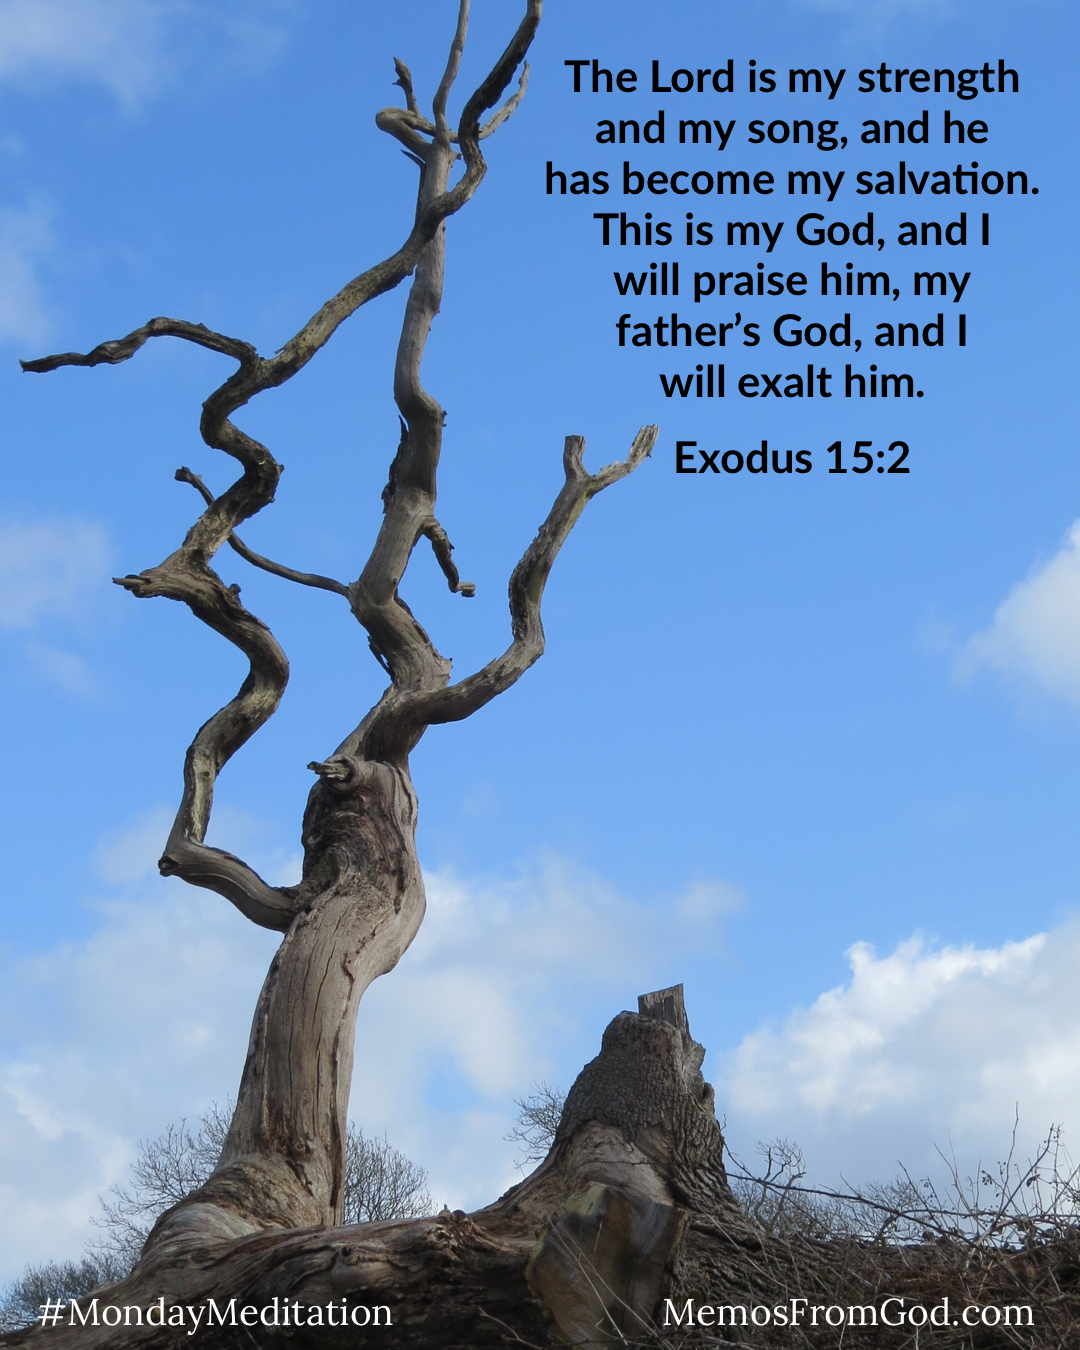 A tree with gnarled branches and no leaves. Caption: The Lord is my strength and my song, and he has become my salvation. This is my God, and I will praise him, my father's God, and I will exalt him. Exodus 15:2